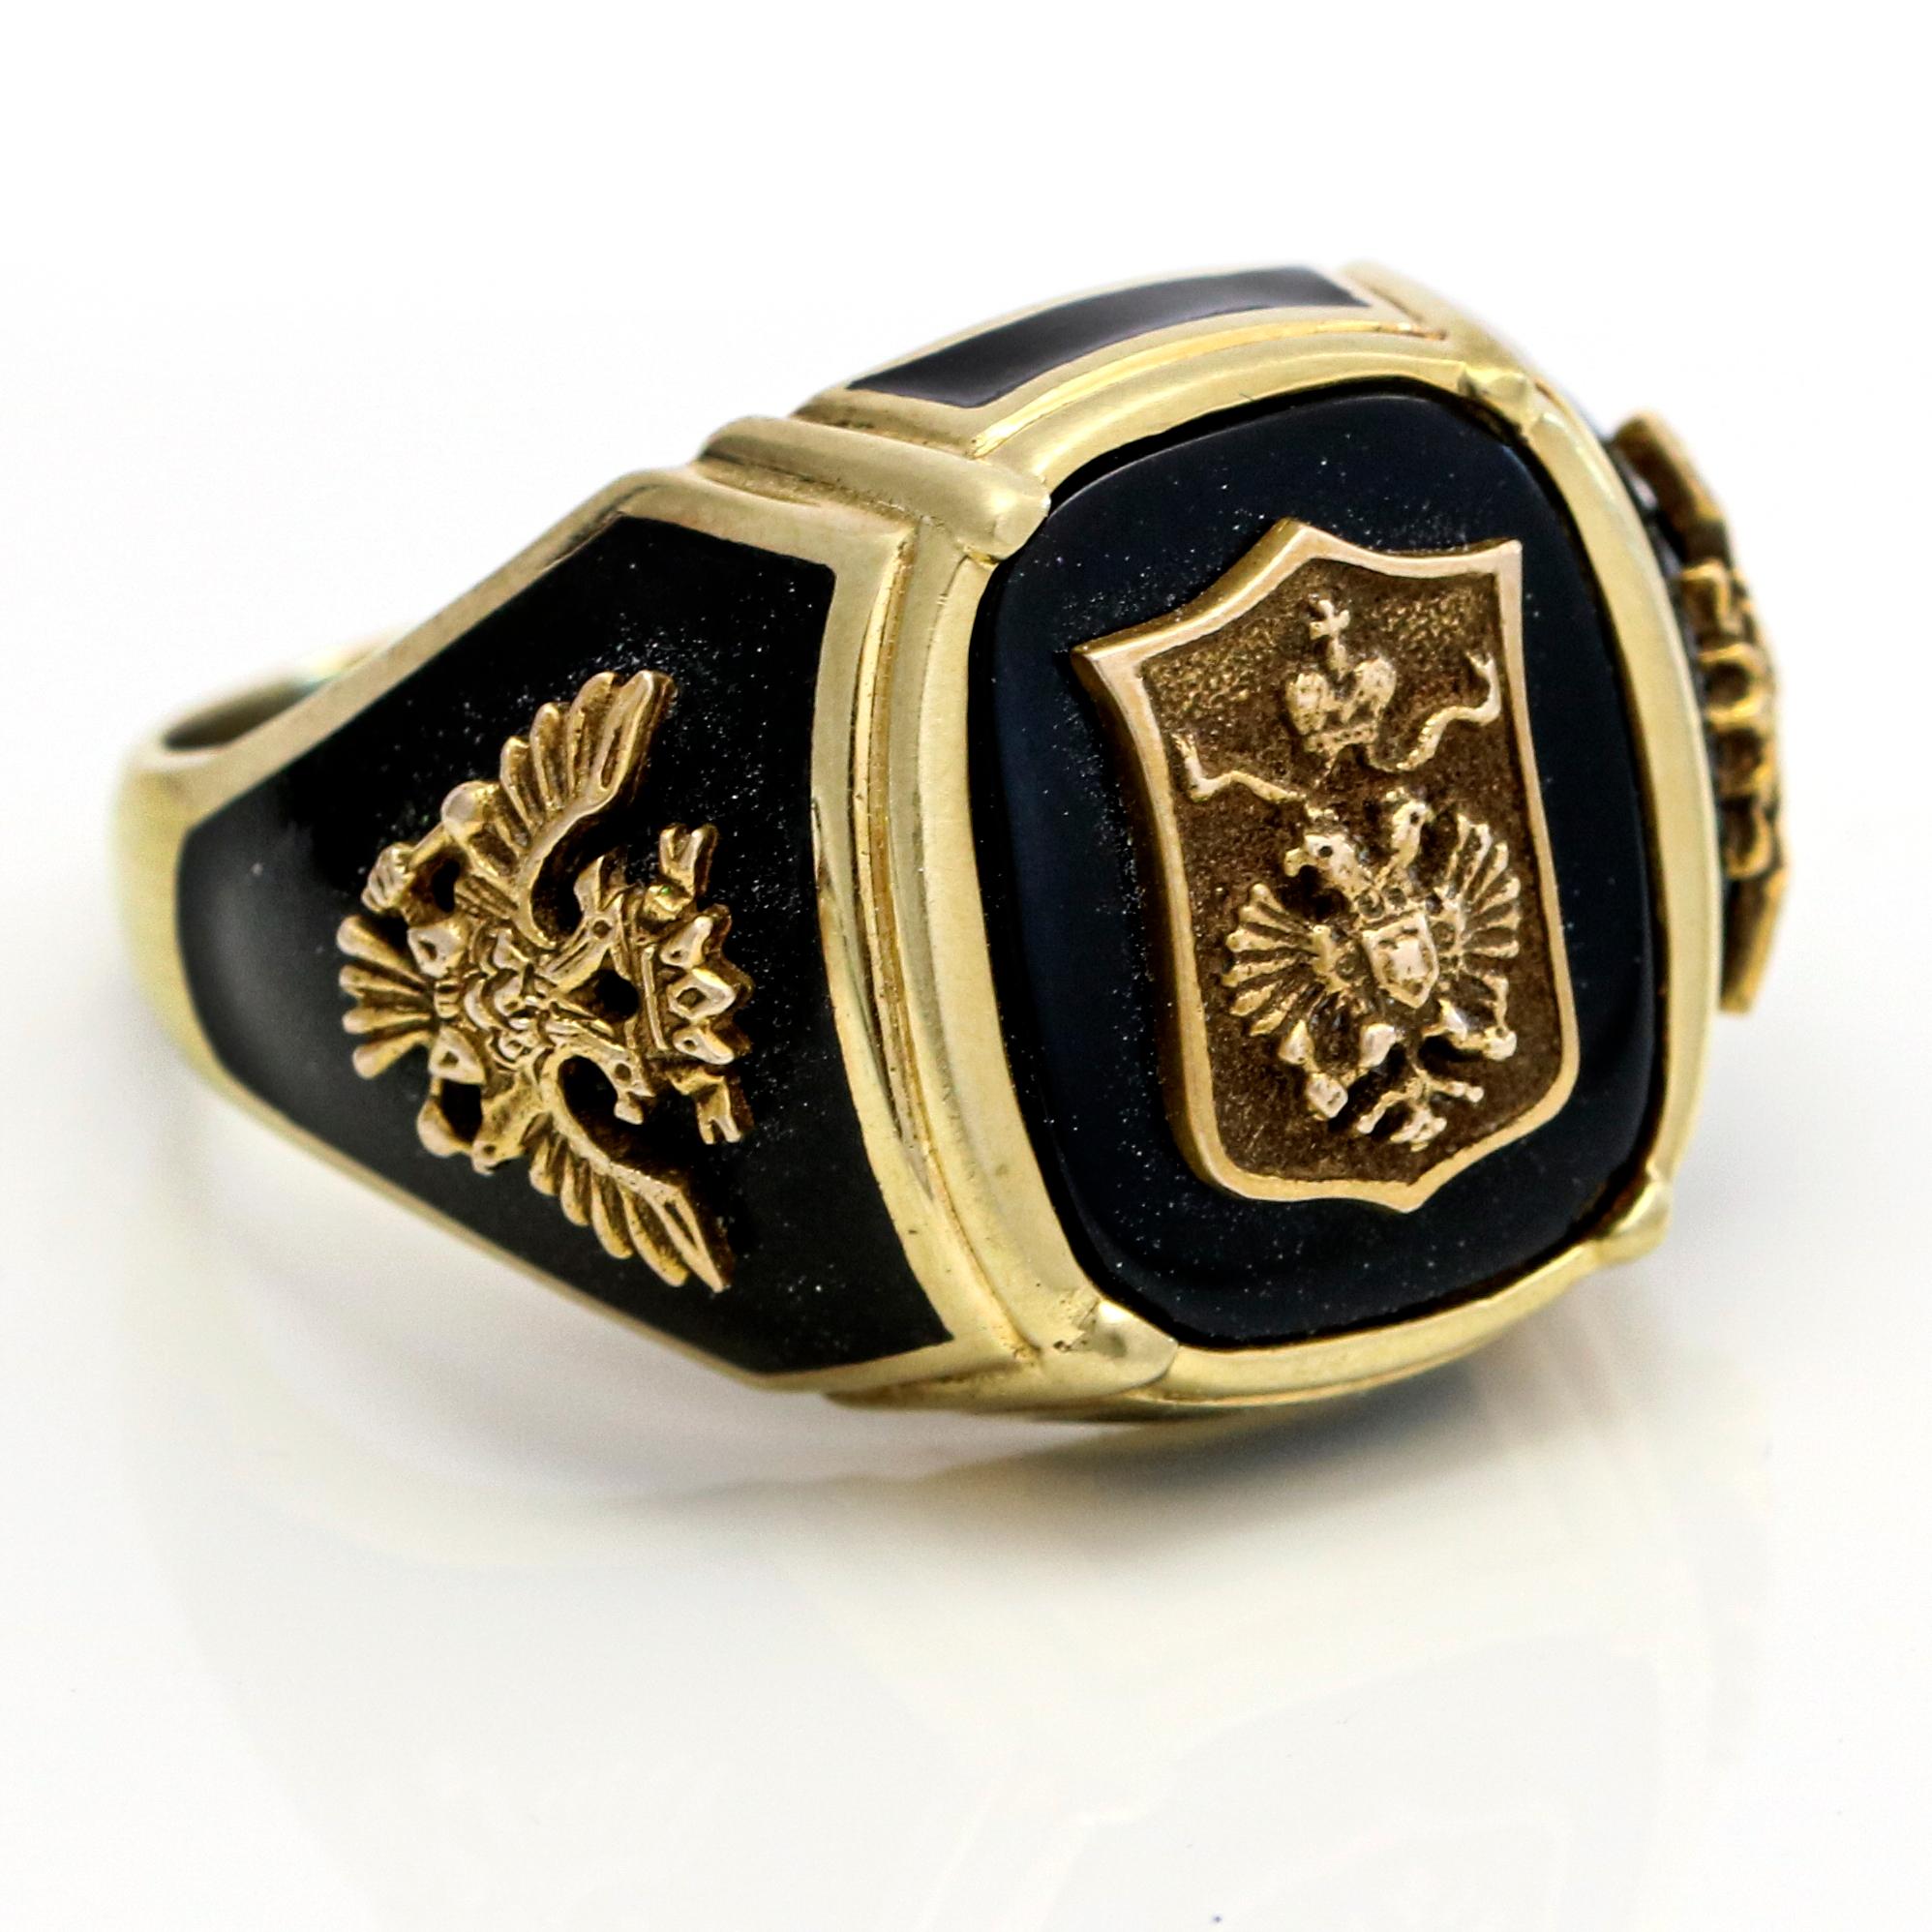 Vintage Men's shield and eagle ring in 14-karat yellow gold with black onyx and enamel.

Size, 13